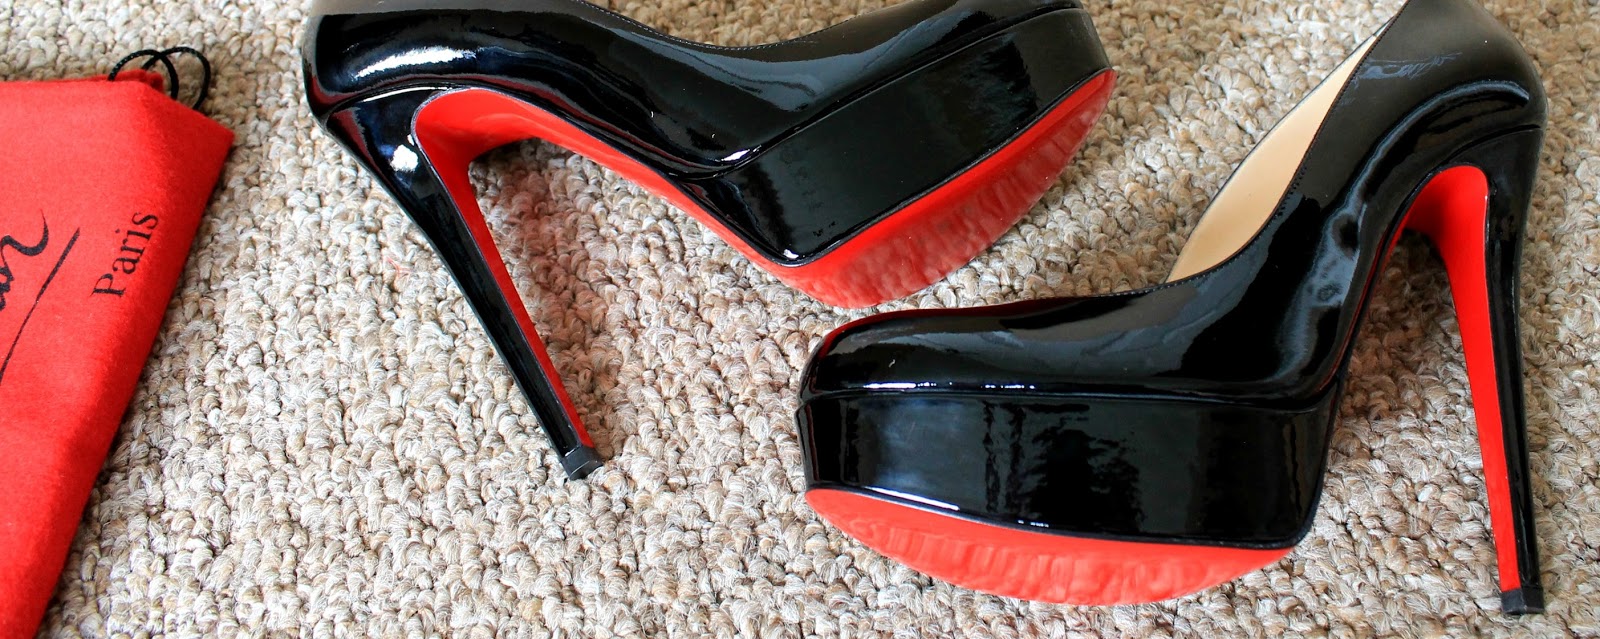 Christian Louboutin Bianca (140mm) Fit Guide \u0026amp; Review | The ...